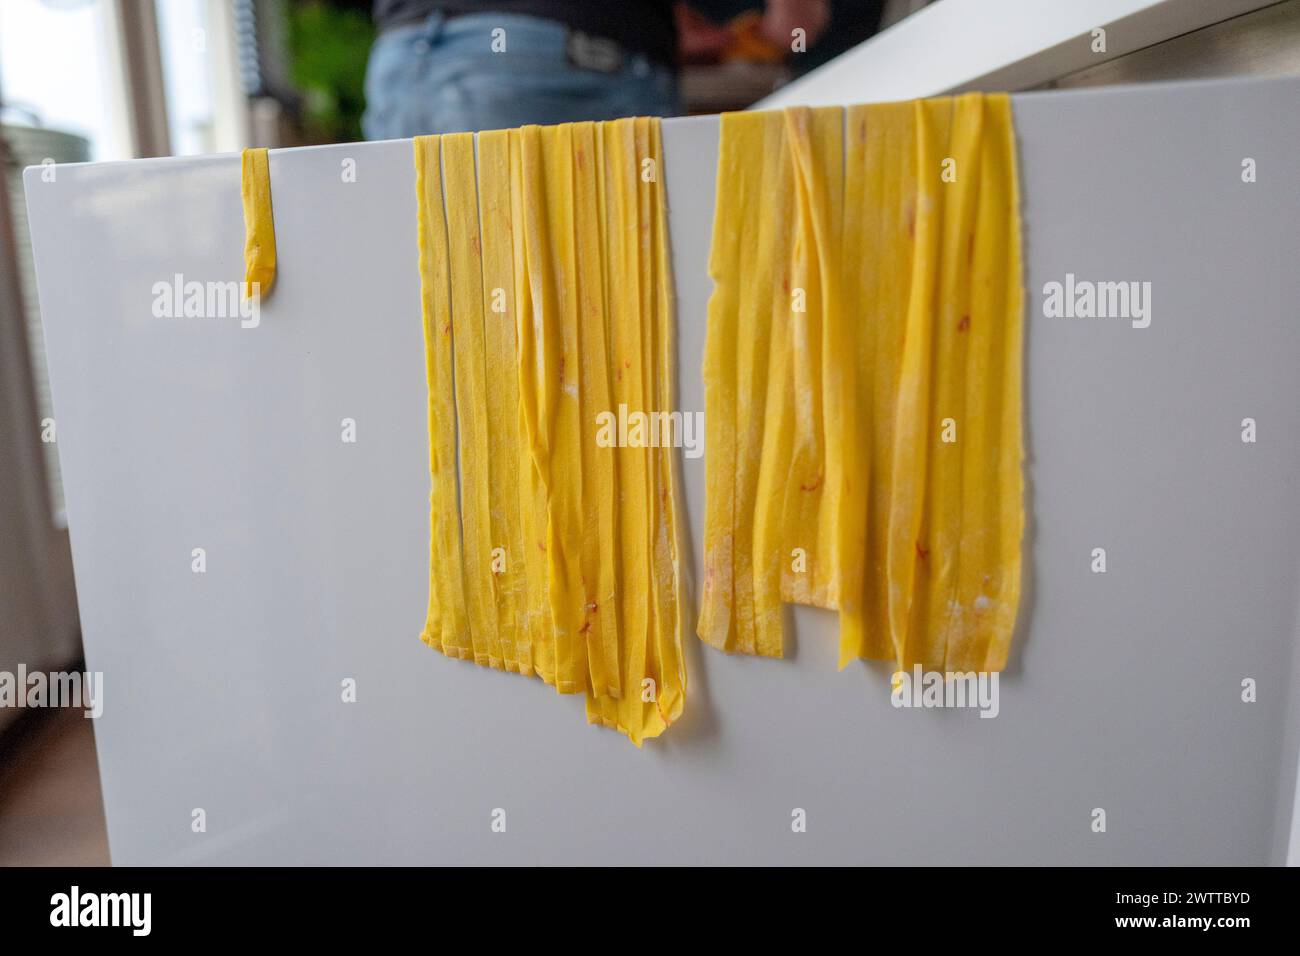 Fresh homemade pasta drying on the edge of a kitchen counter. Stock Photo